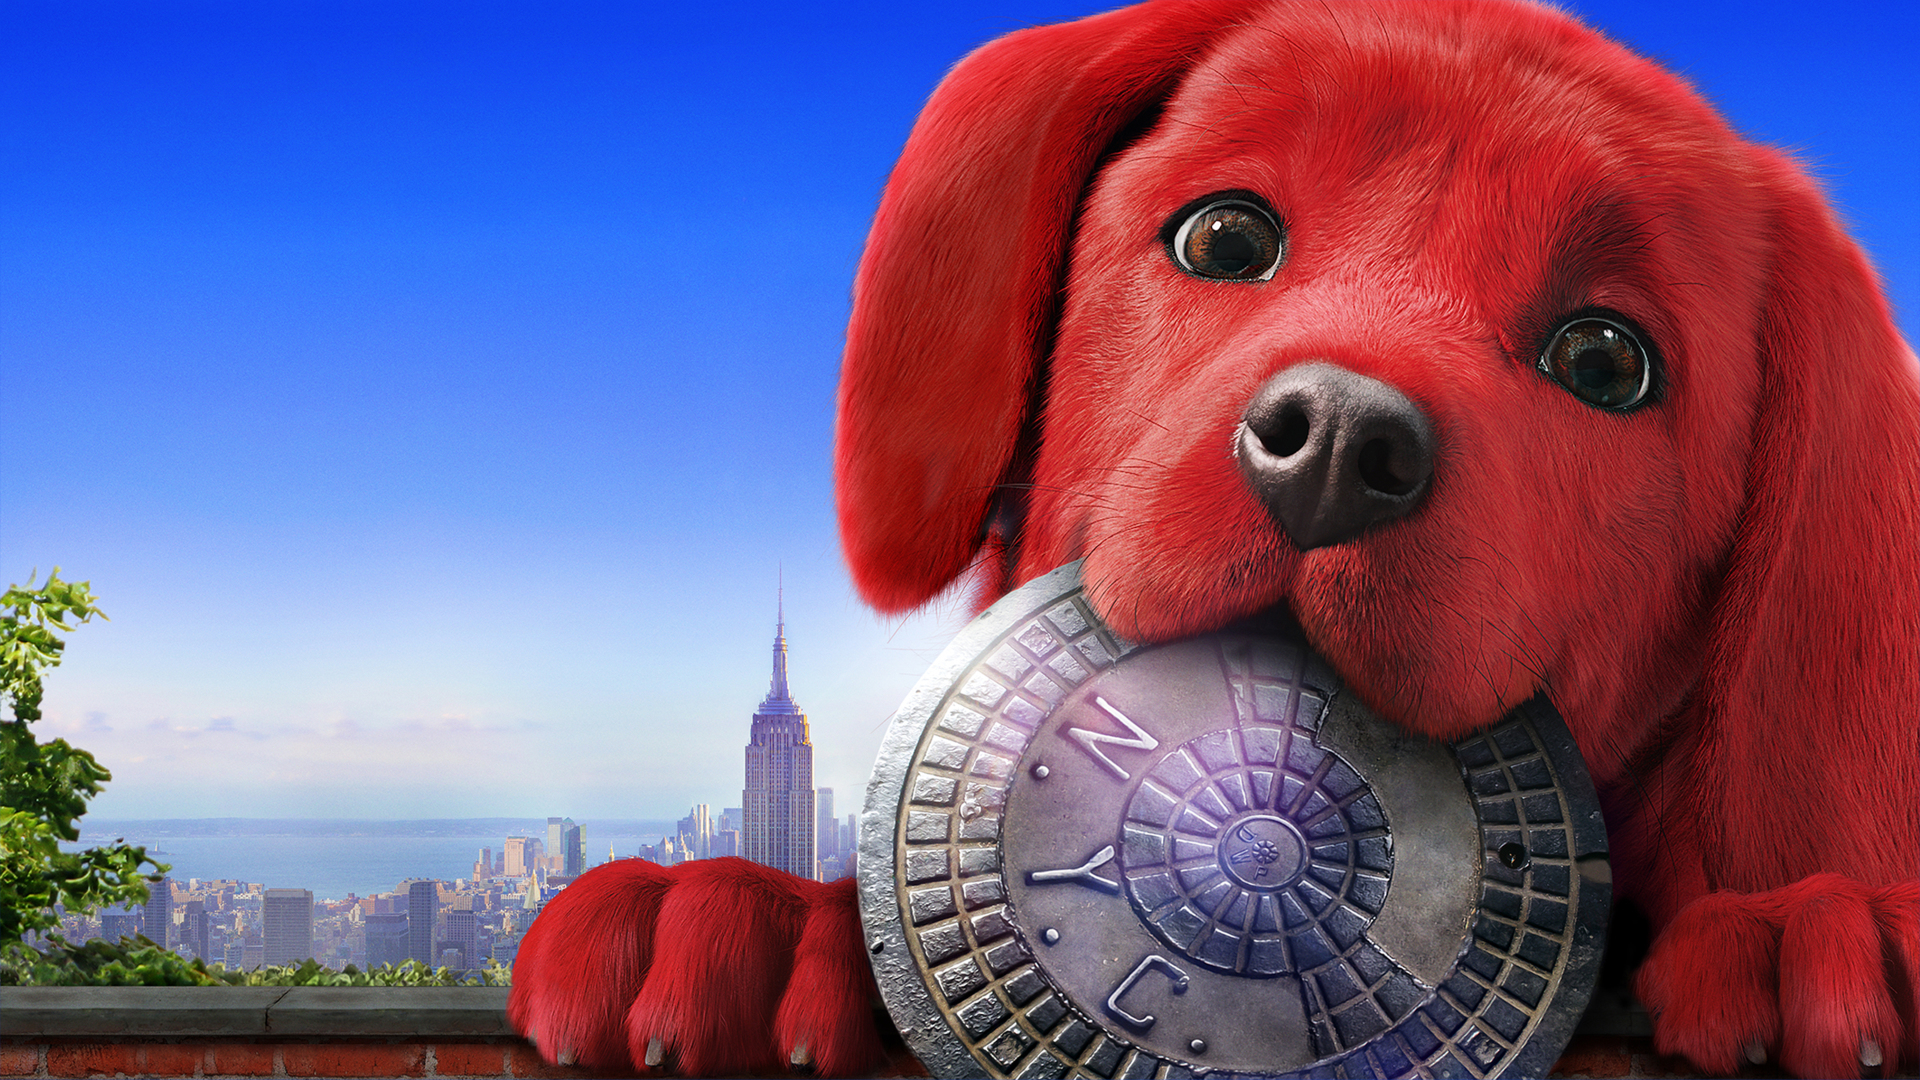 Clifford The Big Red Dog Hd Wallpapers